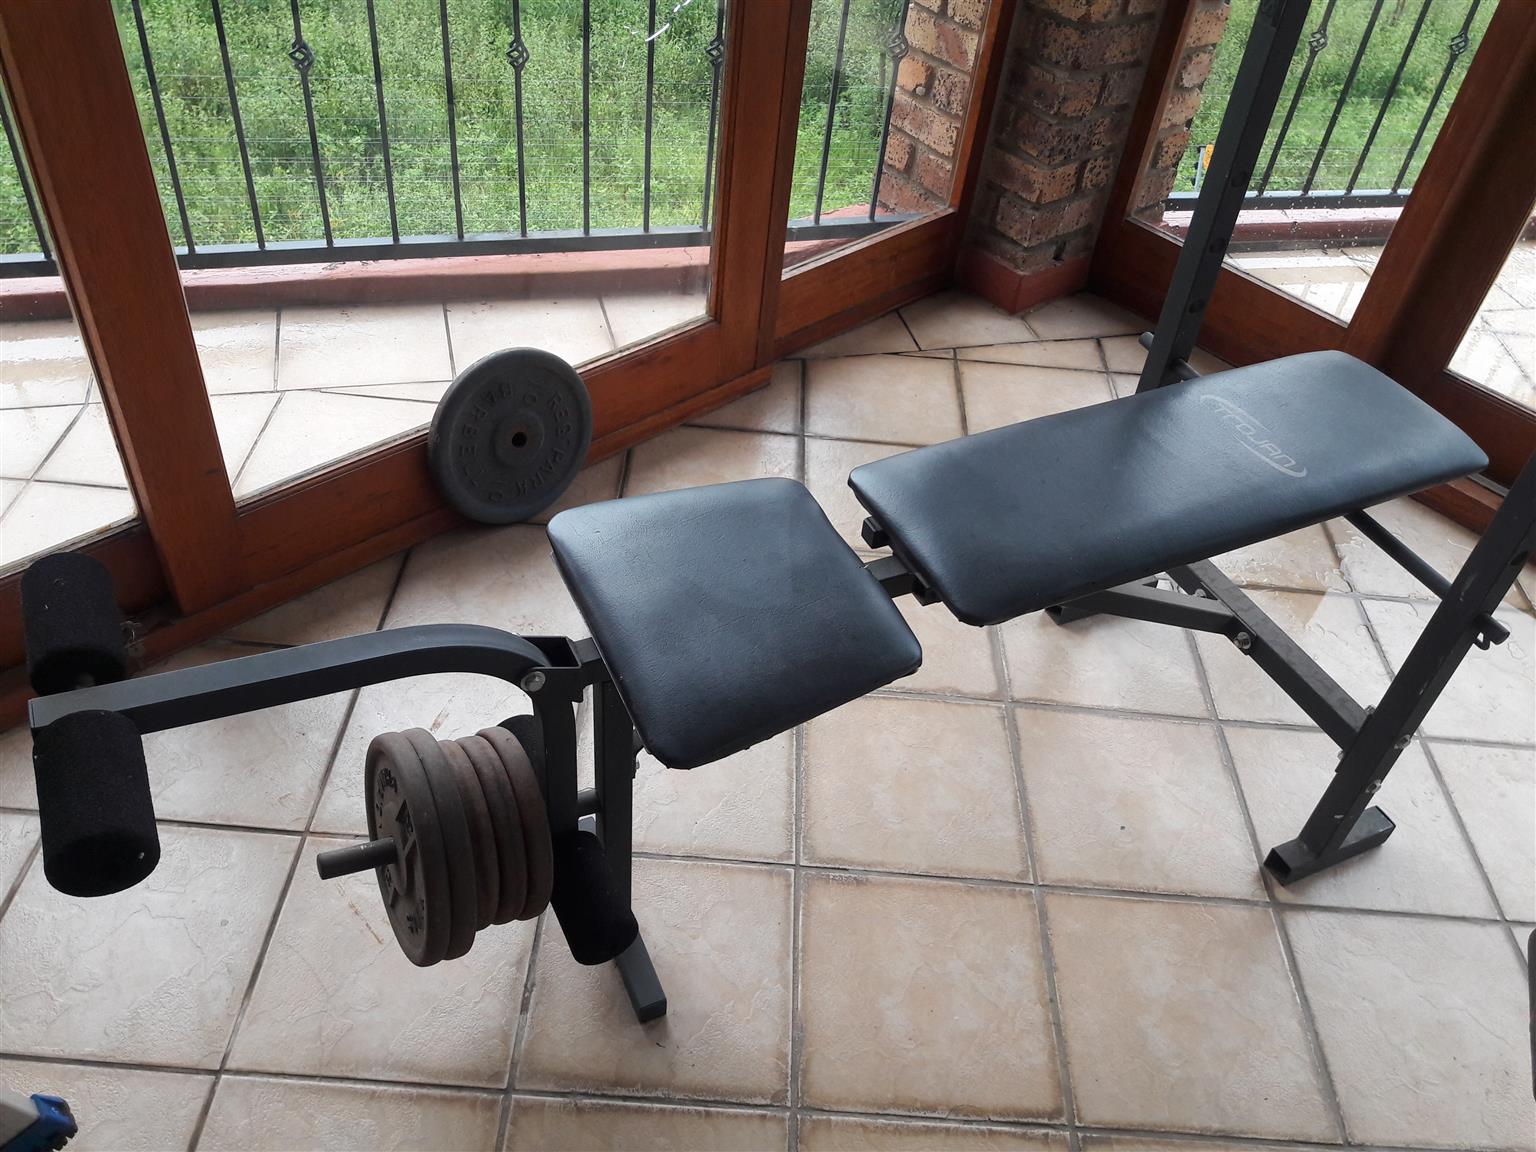 Gym weights for sale